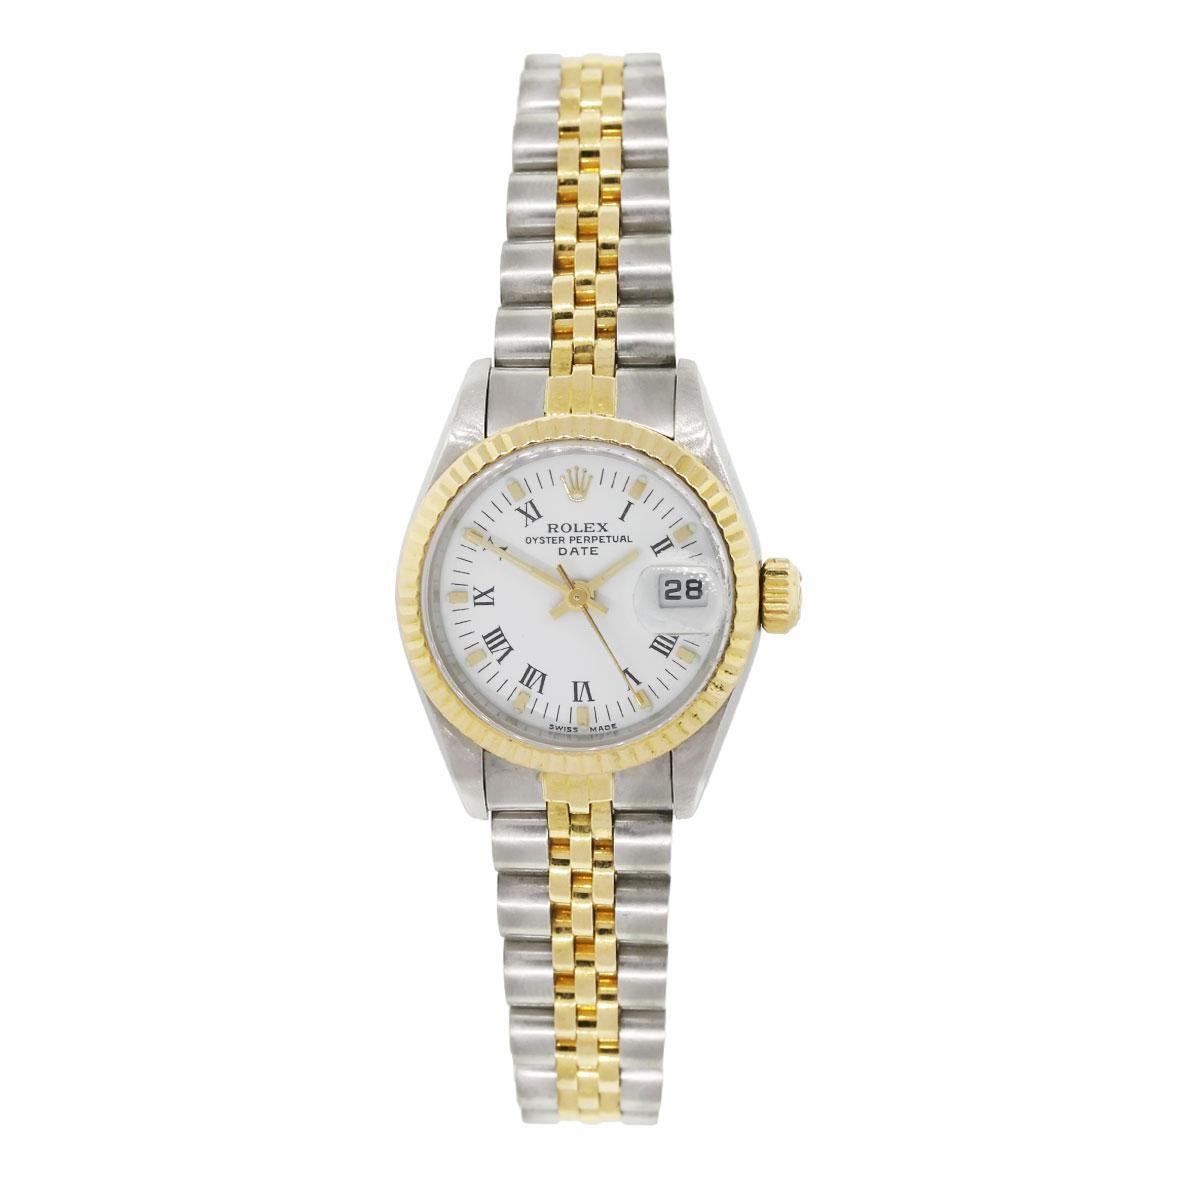 Brand: Rolex
MPN: 6917
Model: Date
Case Material: Stainless steel
Case Diameter: 26mm
Crystal: Sapphire crystal (scratch resistant)
Bezel: 18k yellow gold fluted bezel
Dial: White roman dial
Bracelet: Stainless steel and 18k yellow gold jubilee